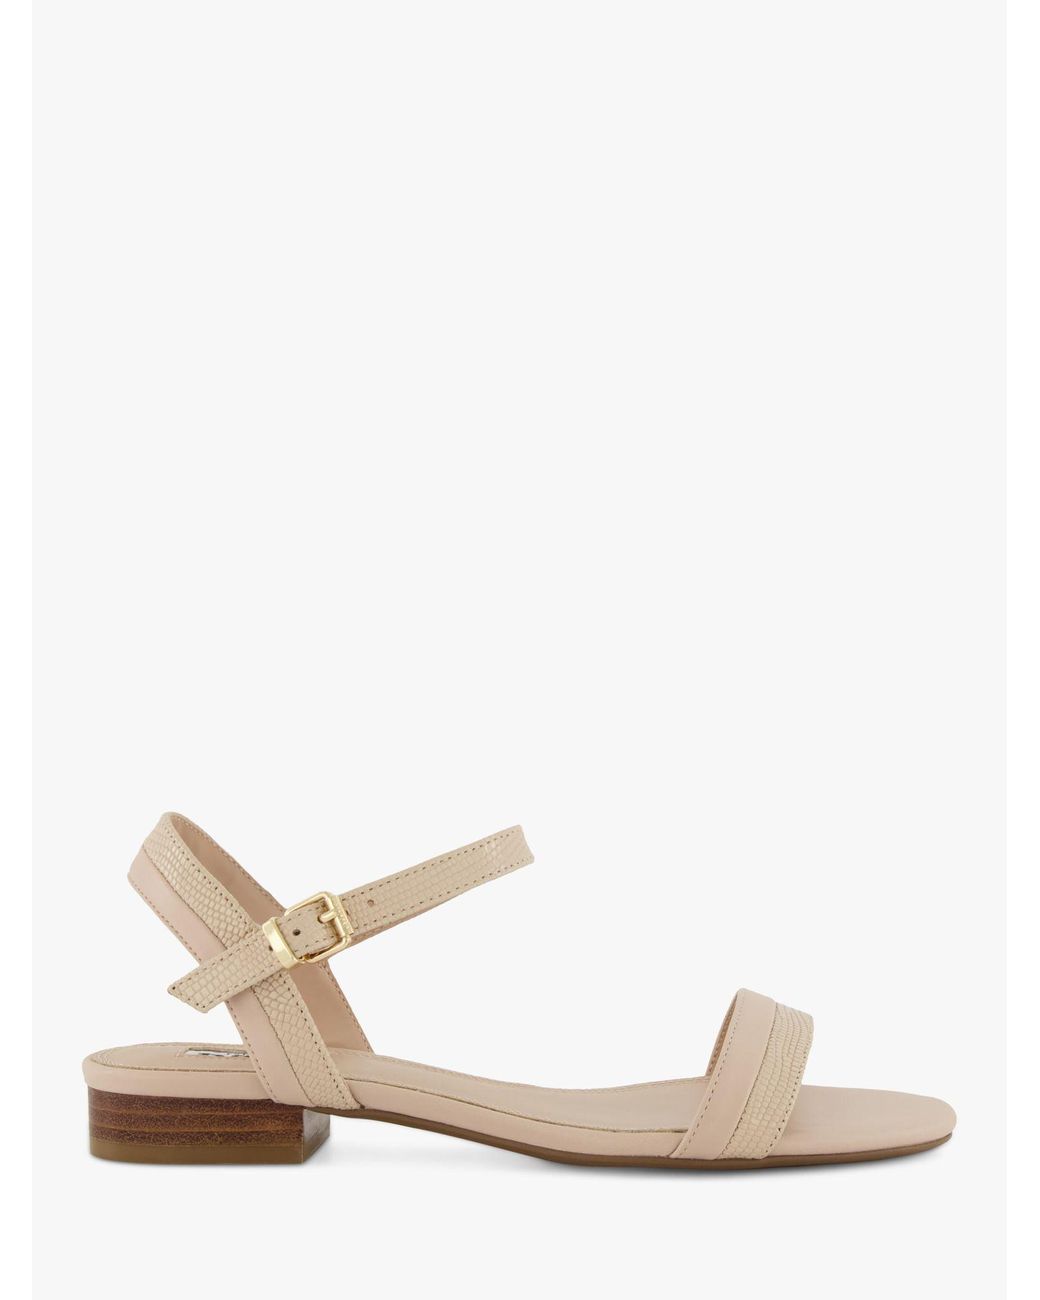 Dune Loyalty Leather Stacked Low Block Heel Sandals in Natural | Lyst UK